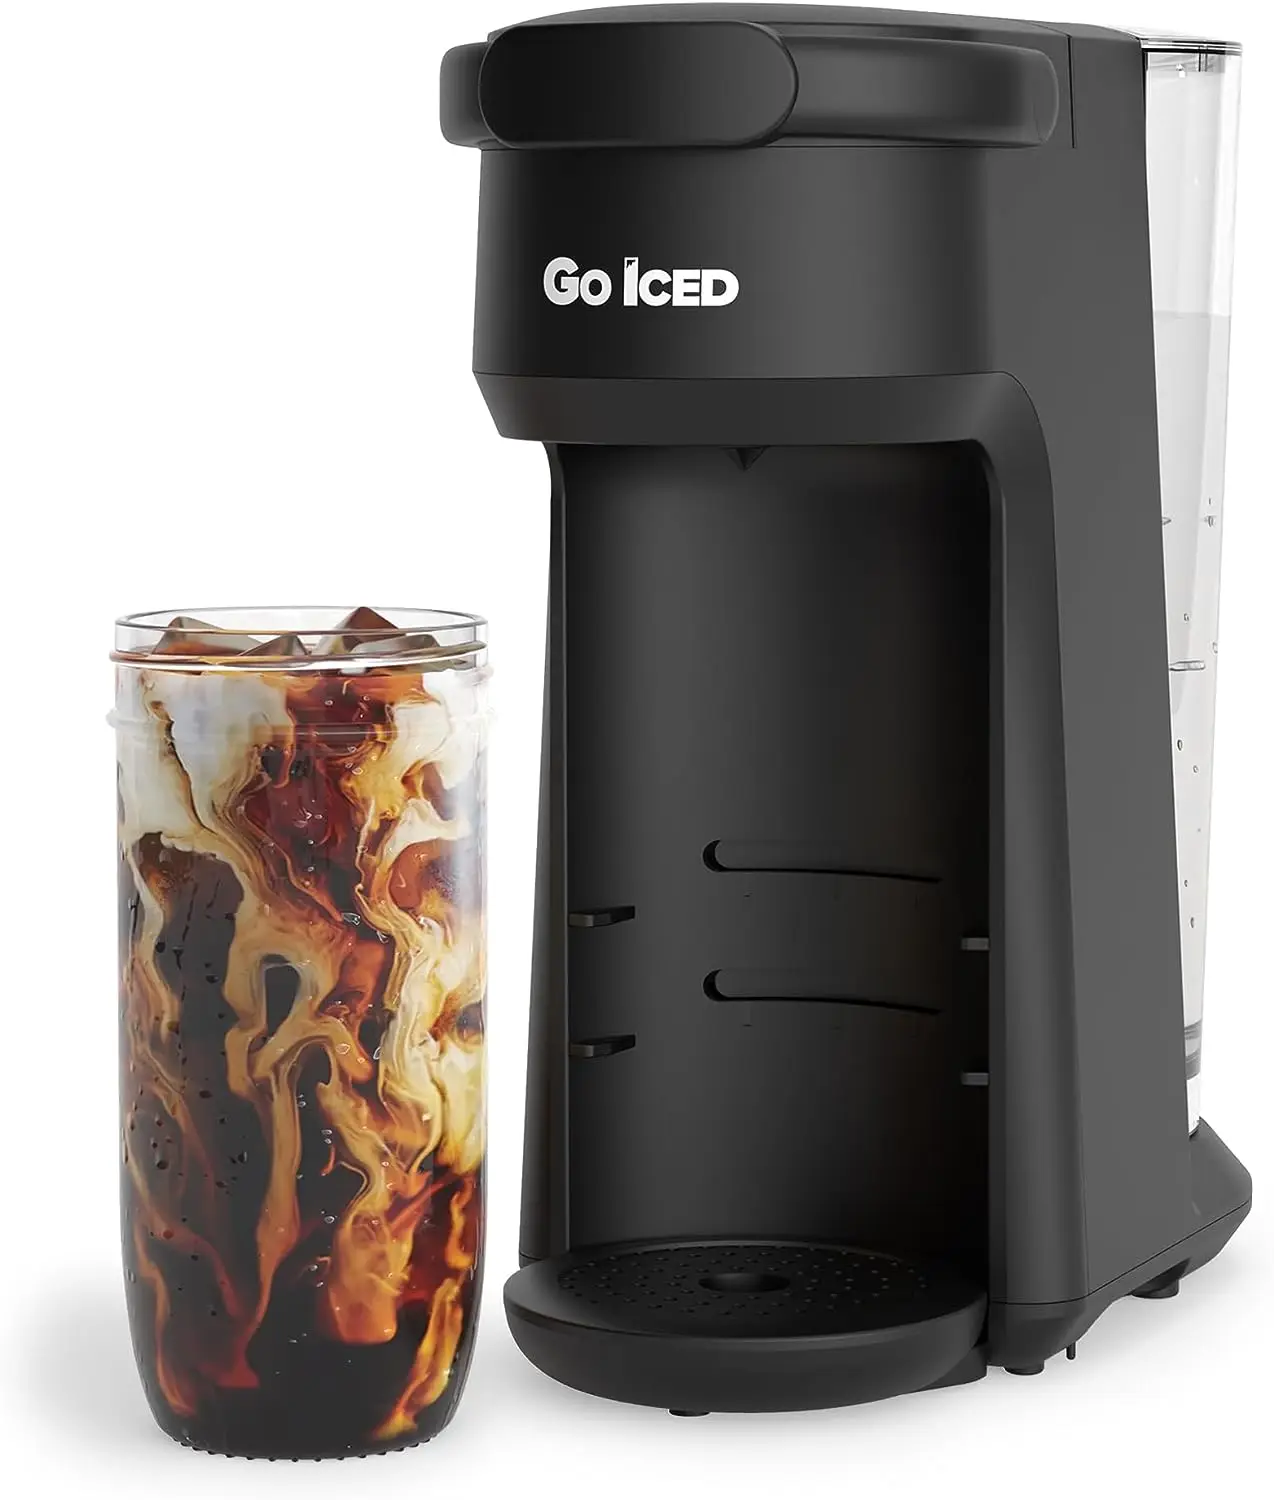 https://ae01.alicdn.com/kf/S9b835932a226442fa0d9b012ea2d37be8/u2013-The-Ultimate-Iced-Coffee-Maker-Make-delicious-and-flavorful-iced-coffee-at-home-in.jpg